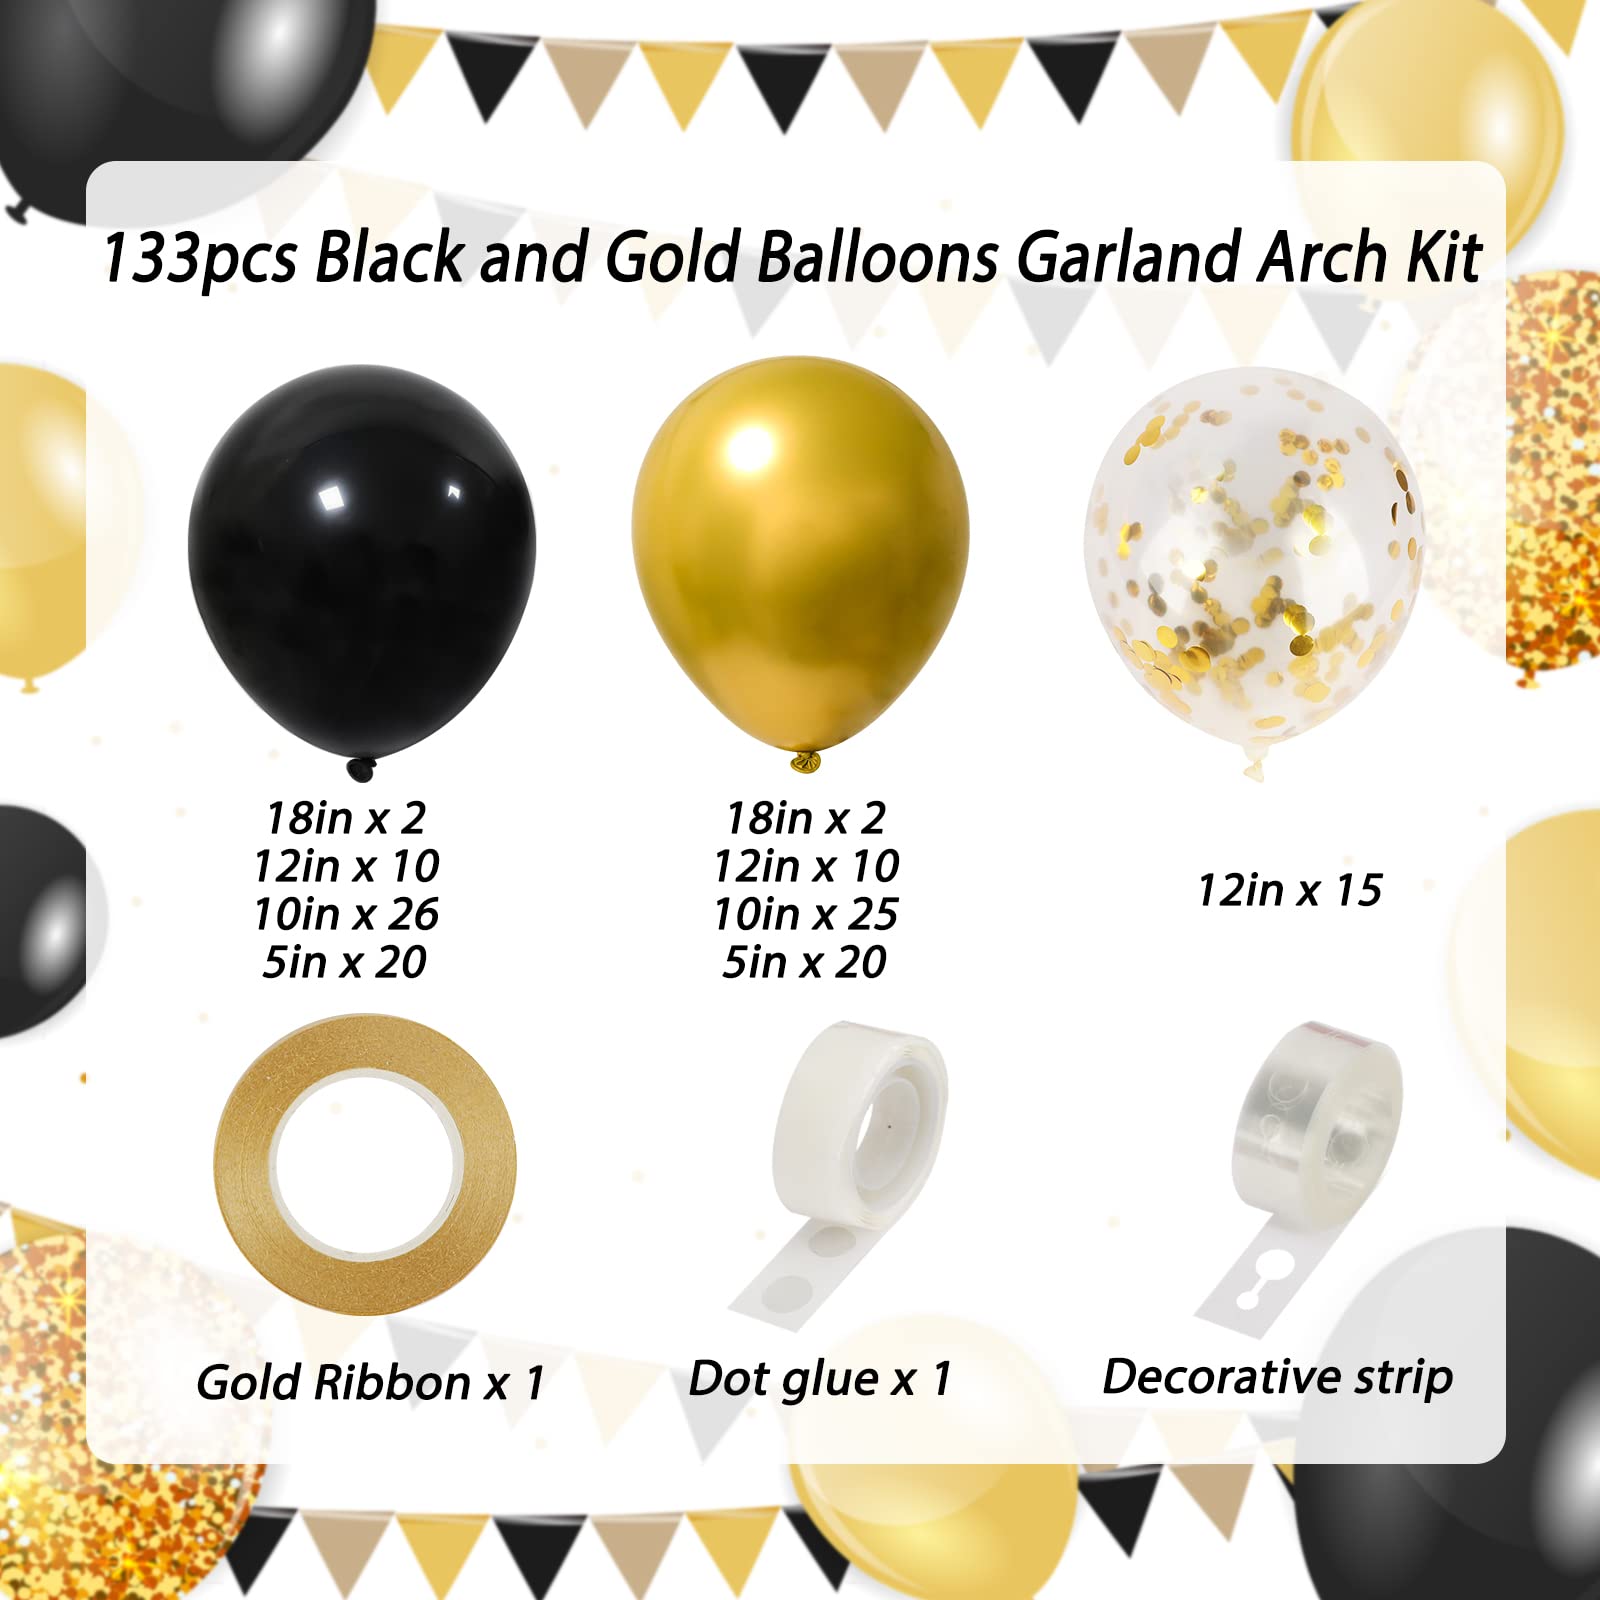 Black and gold balloon arch kit contents